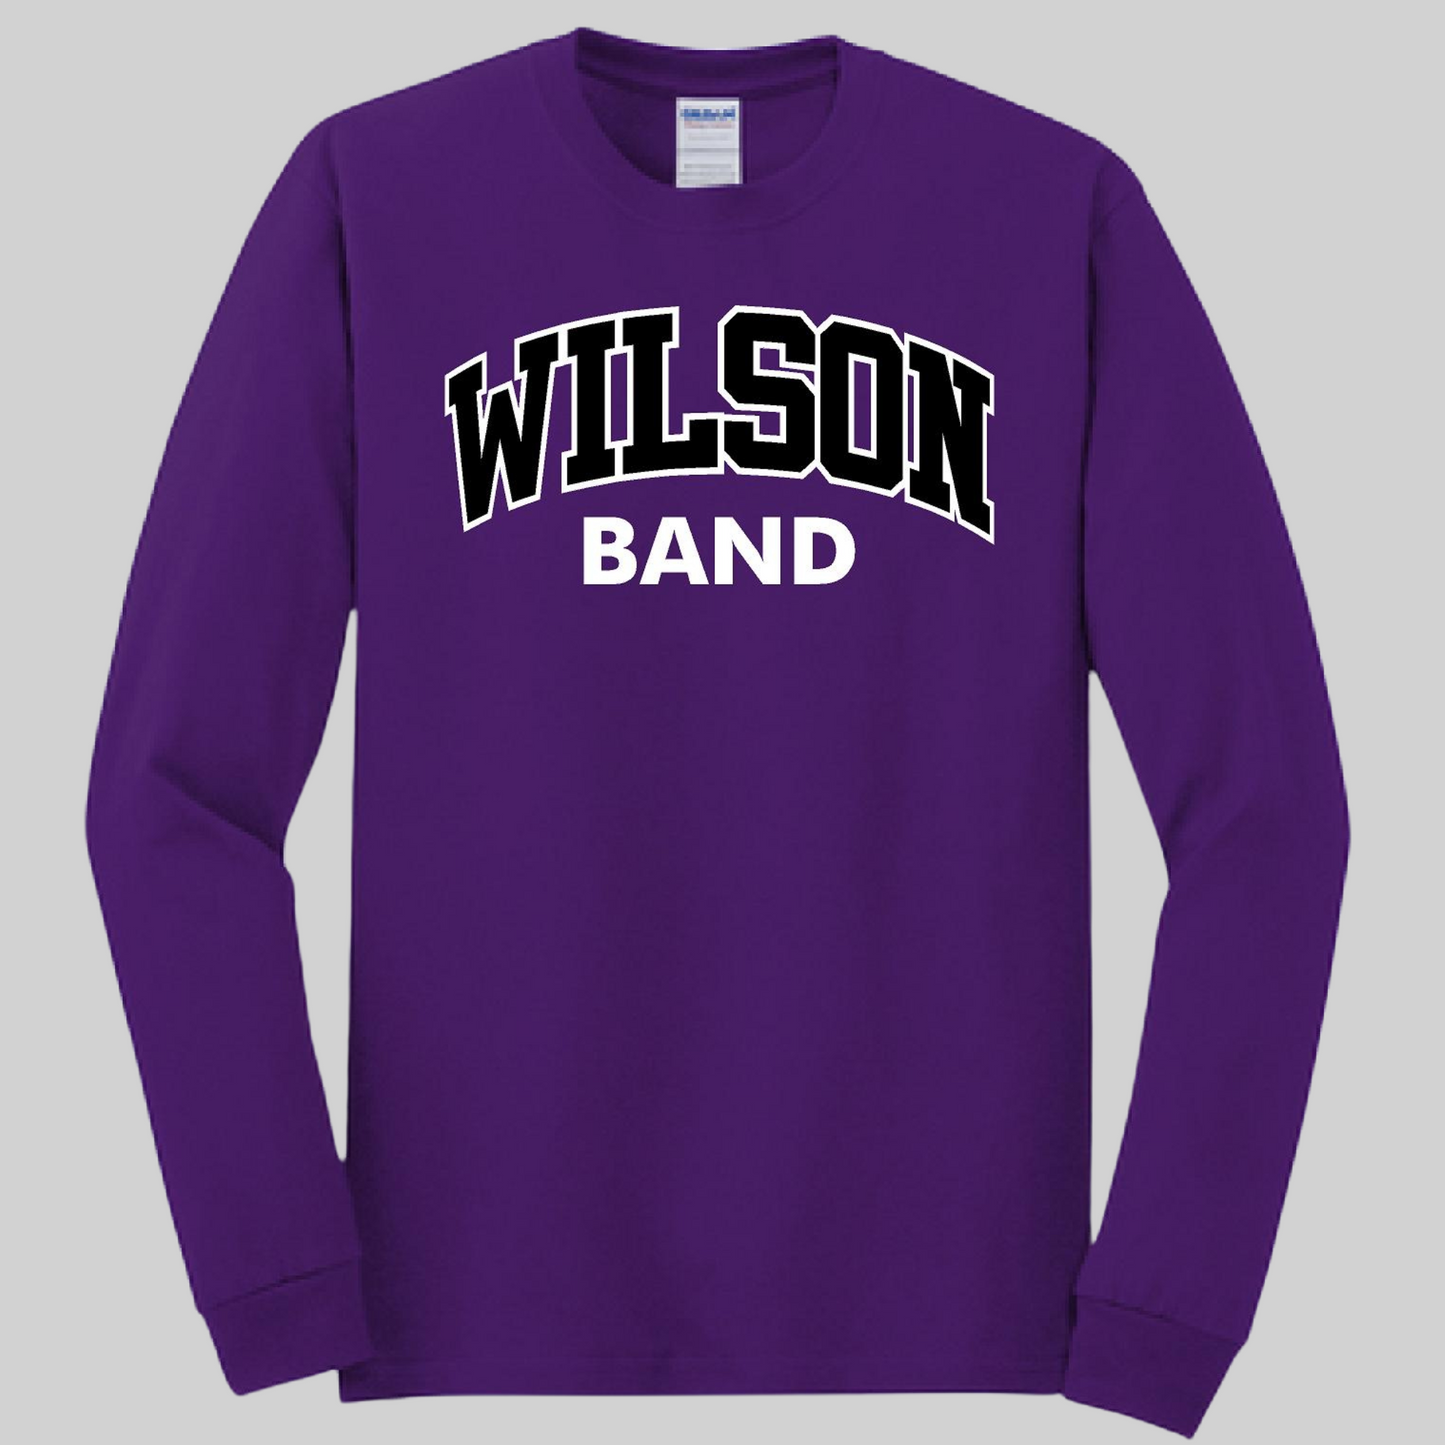 Wilson Middle School Band 23-3